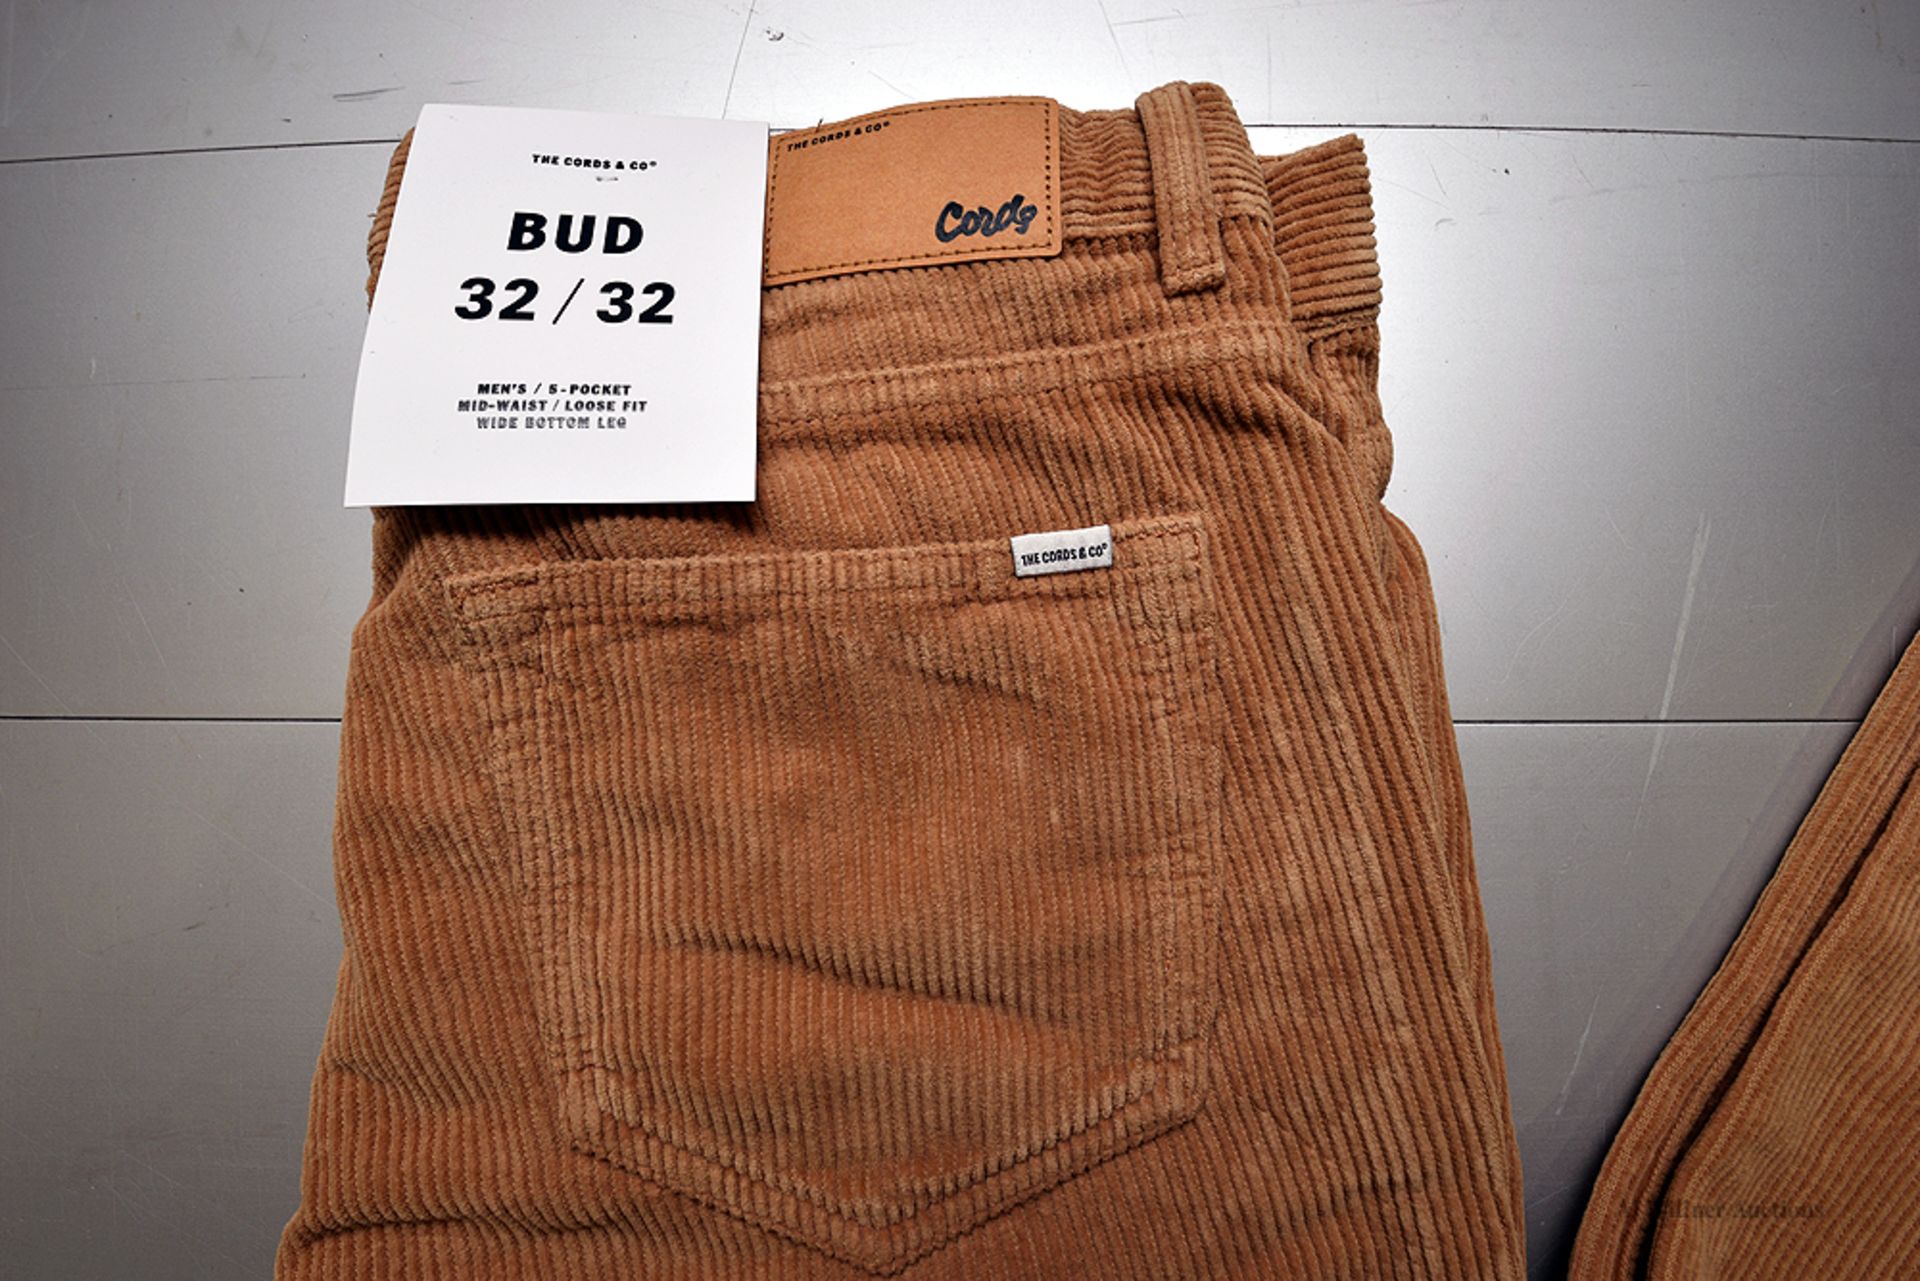 The Cords & Co. "Bud" Style, Men's/5-Pocket/Mid-Waist/Loose Fit/Wide Bottom Leg Pants - Image 2 of 5